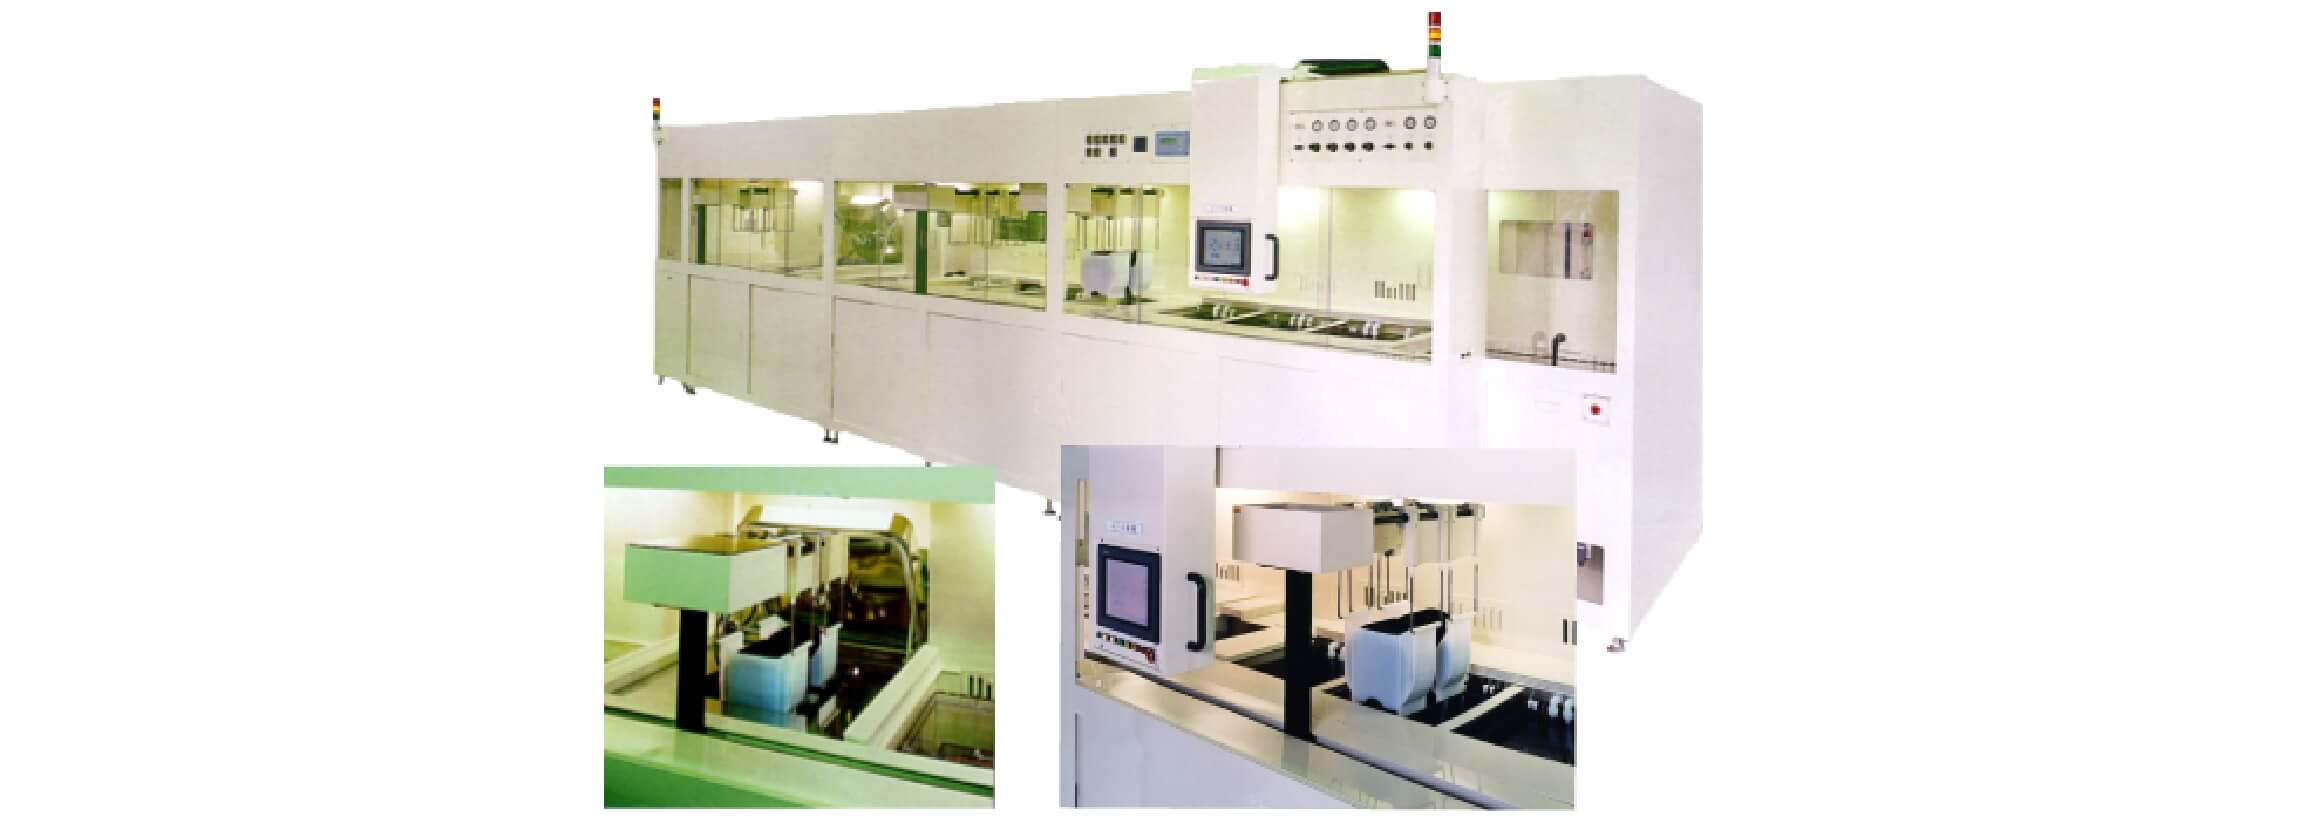 300mm Wafer Automatic Cleaning System